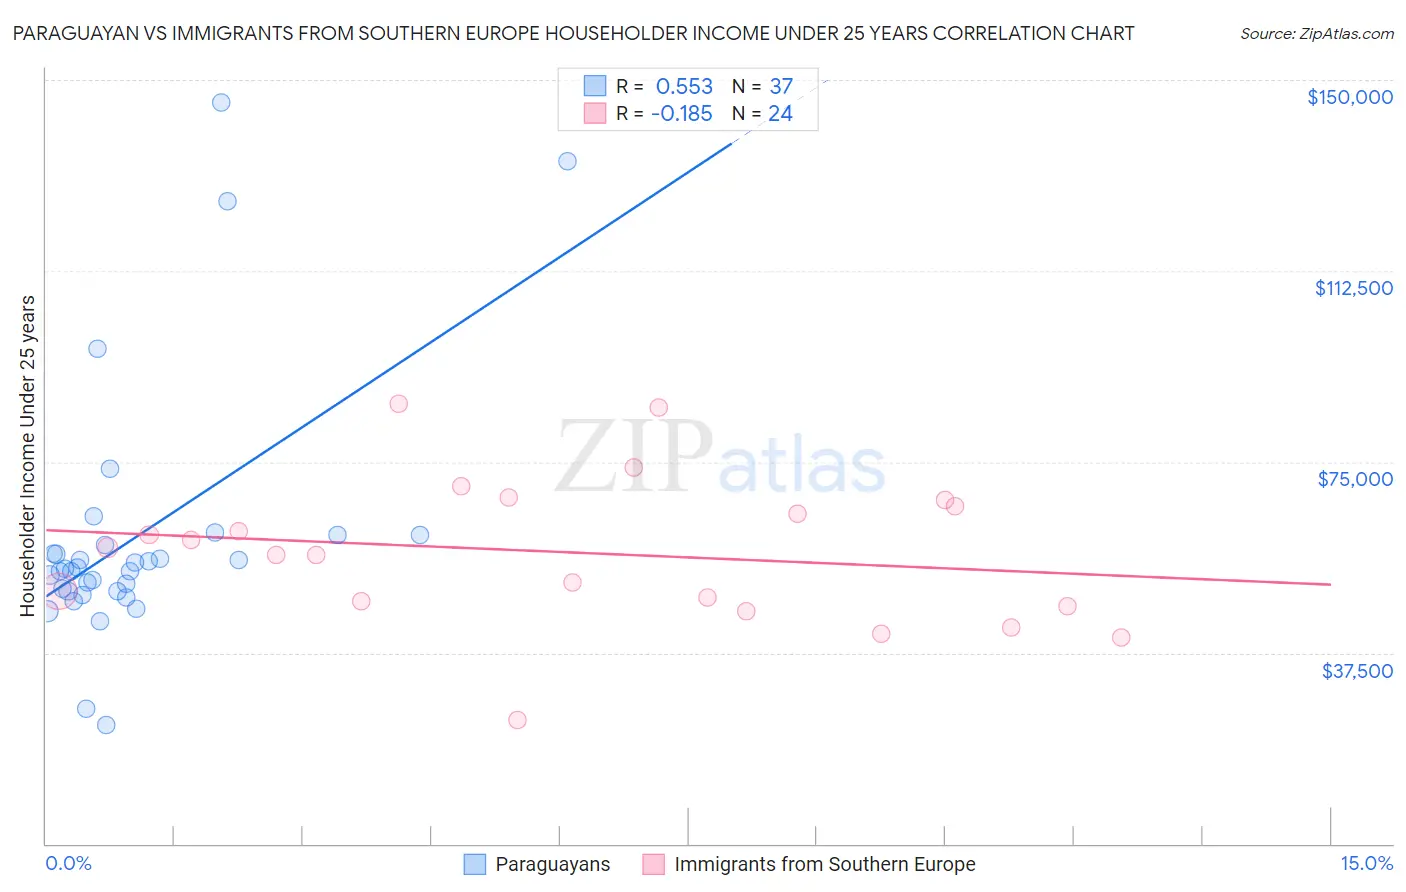 Paraguayan vs Immigrants from Southern Europe Householder Income Under 25 years